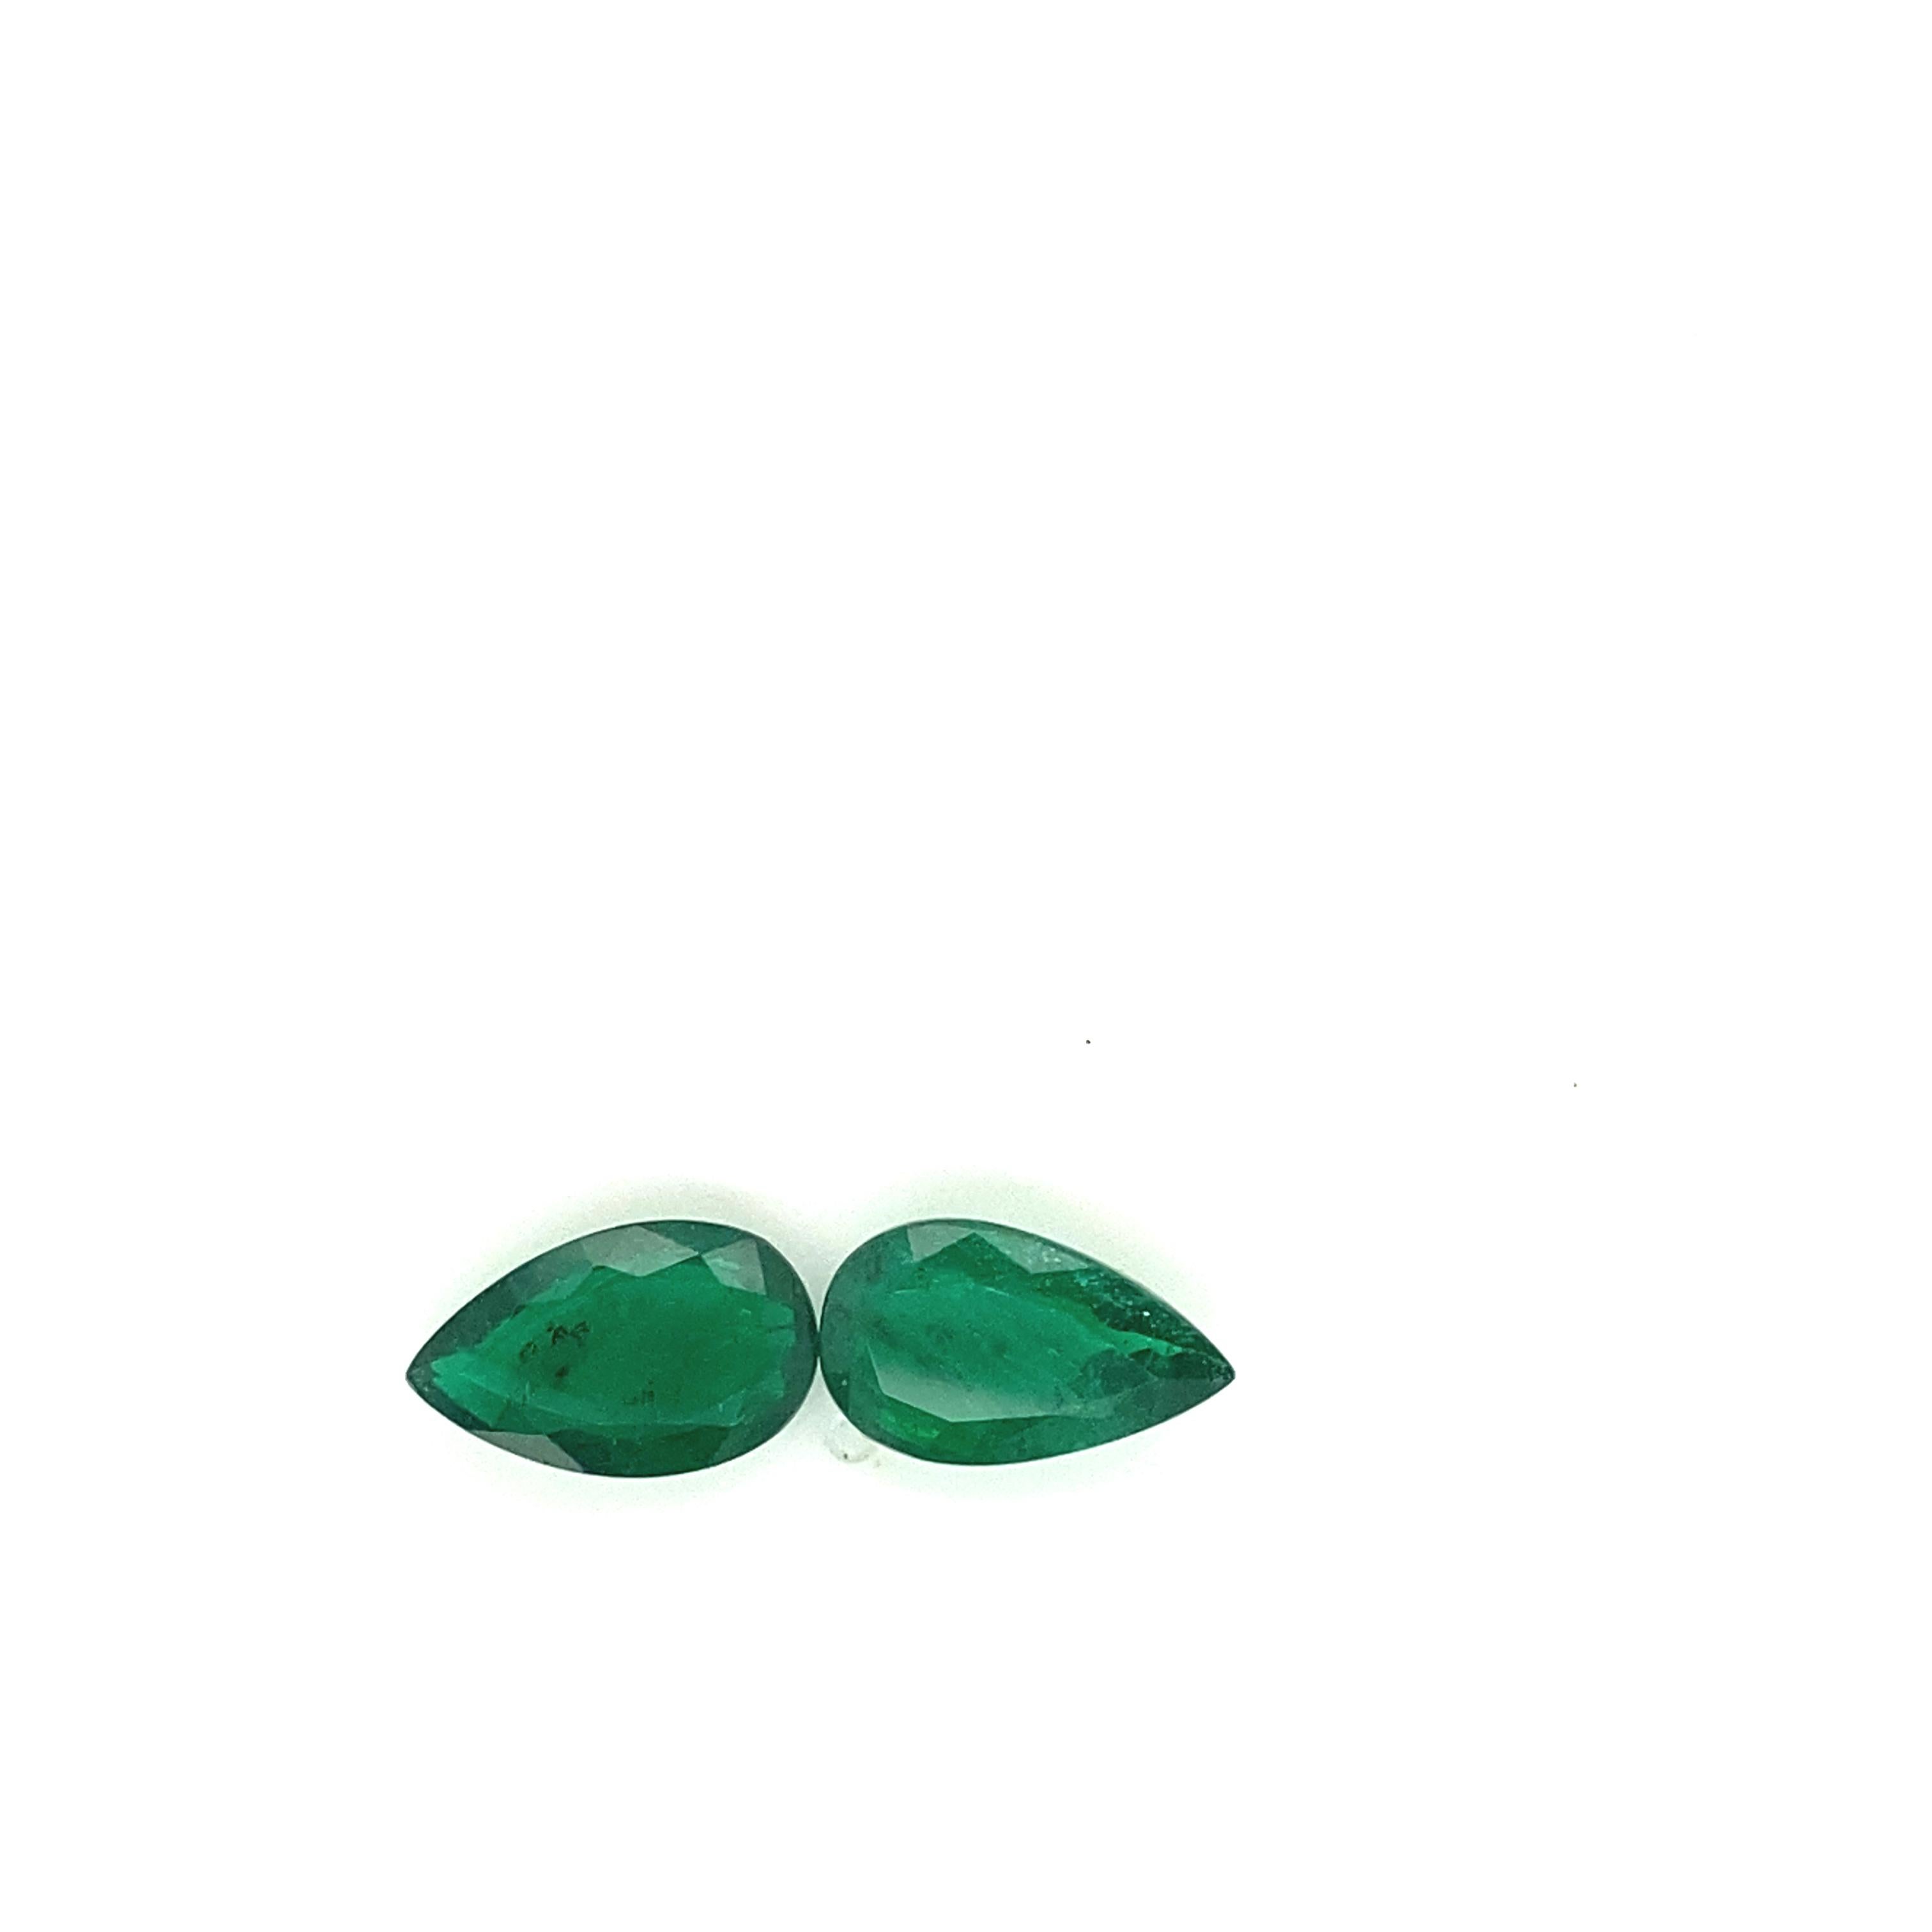 10.87 Carat GRS Certified Pear-Shaped Vivid Green Emerald Pair For Sale 8